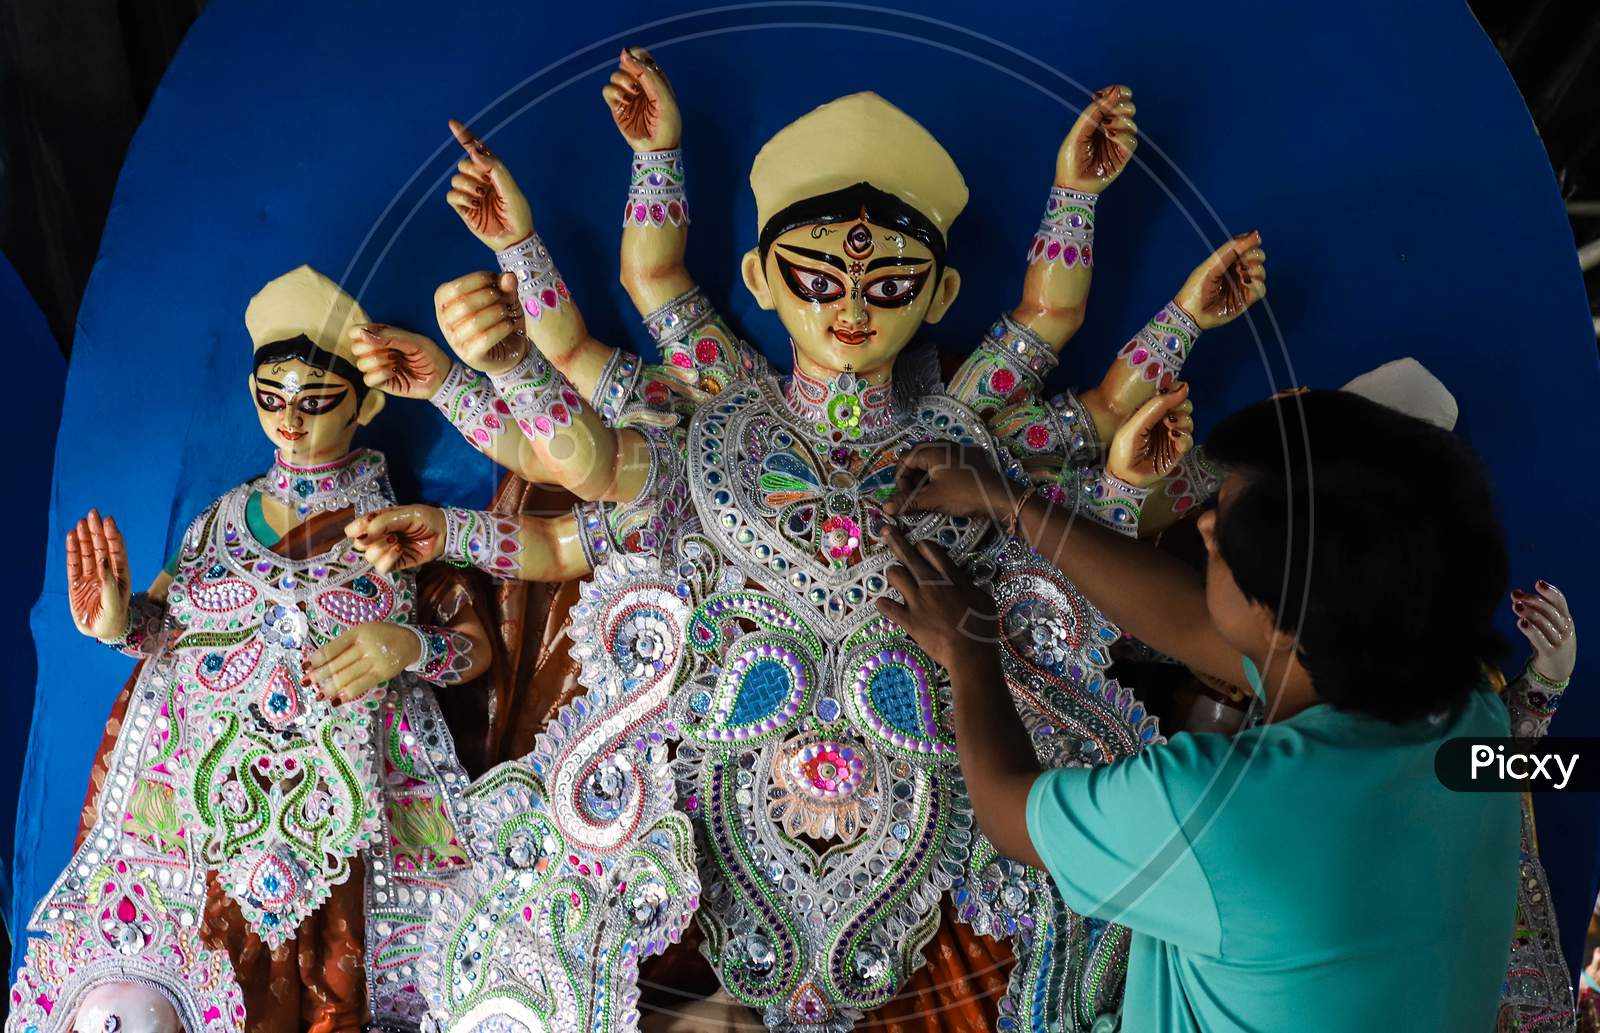 An artist giving final touches to the idol of Hindu Goddess Durga ahead of Durga Puja festival in CR Park, New Delhi on October 19, 2020. Bengalis all over the world celebrate an annual Durga puja festival.